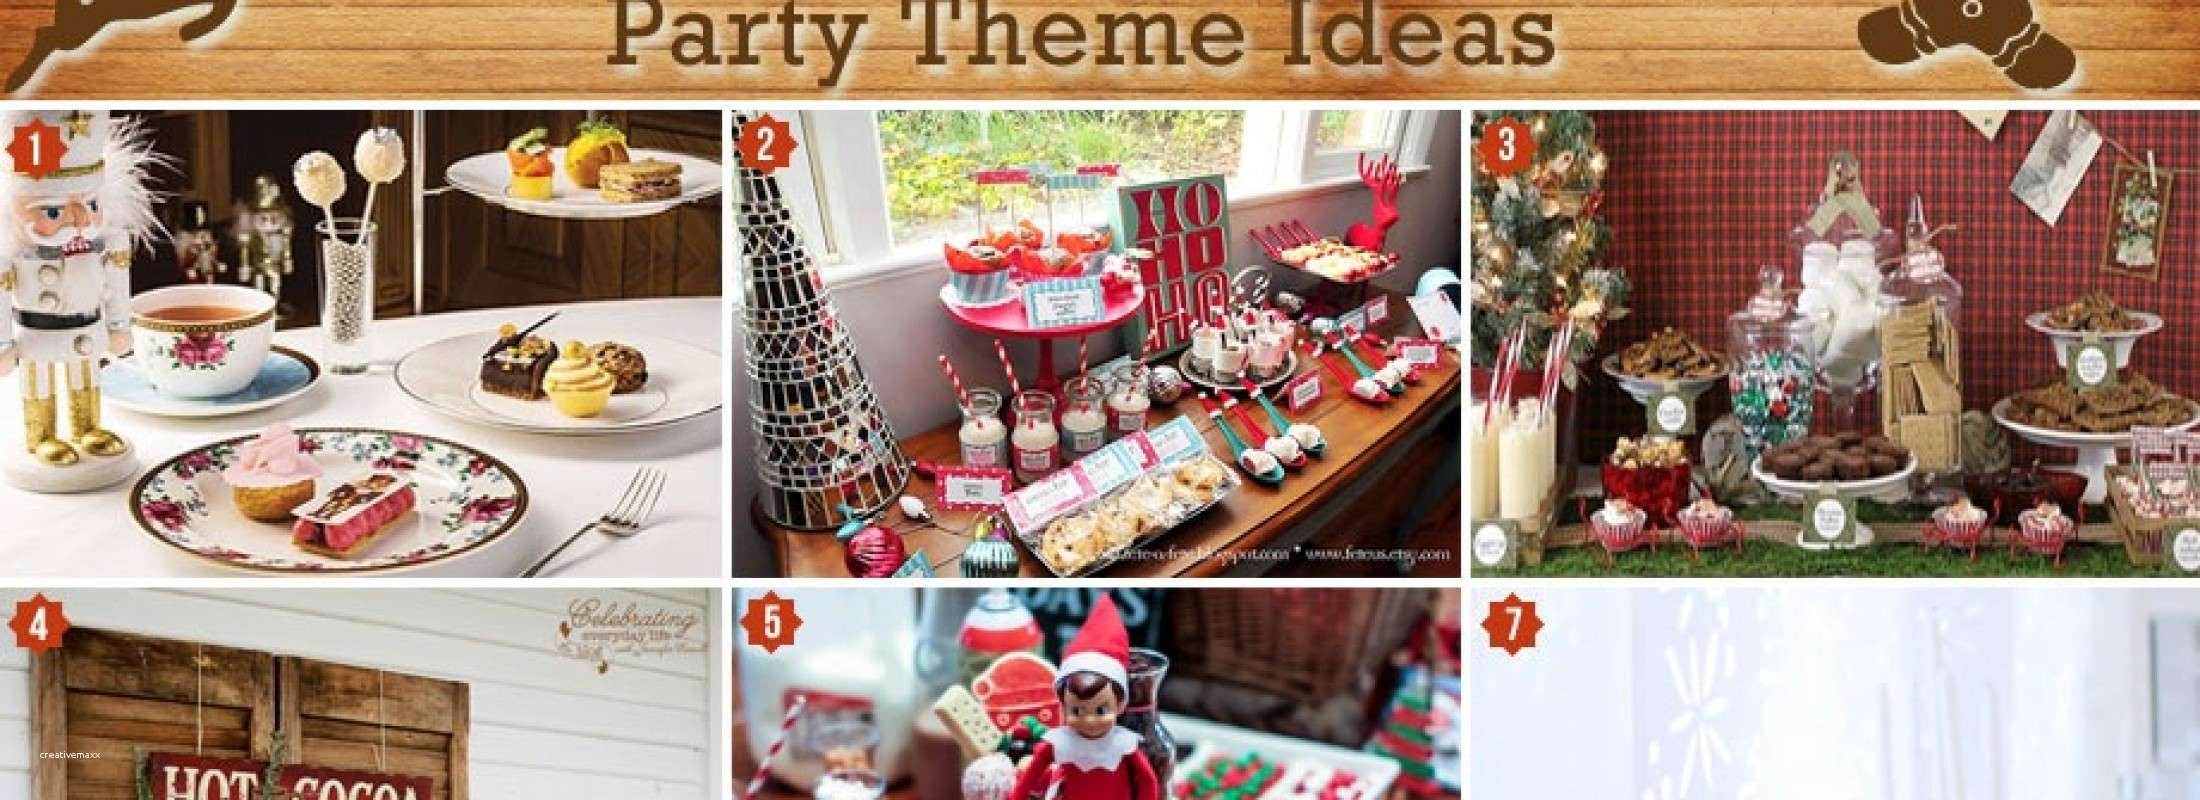 Unique Corporate Holiday Party Ideas
 Elegant Corporate Christmas Party themes Creative Maxx Ideas